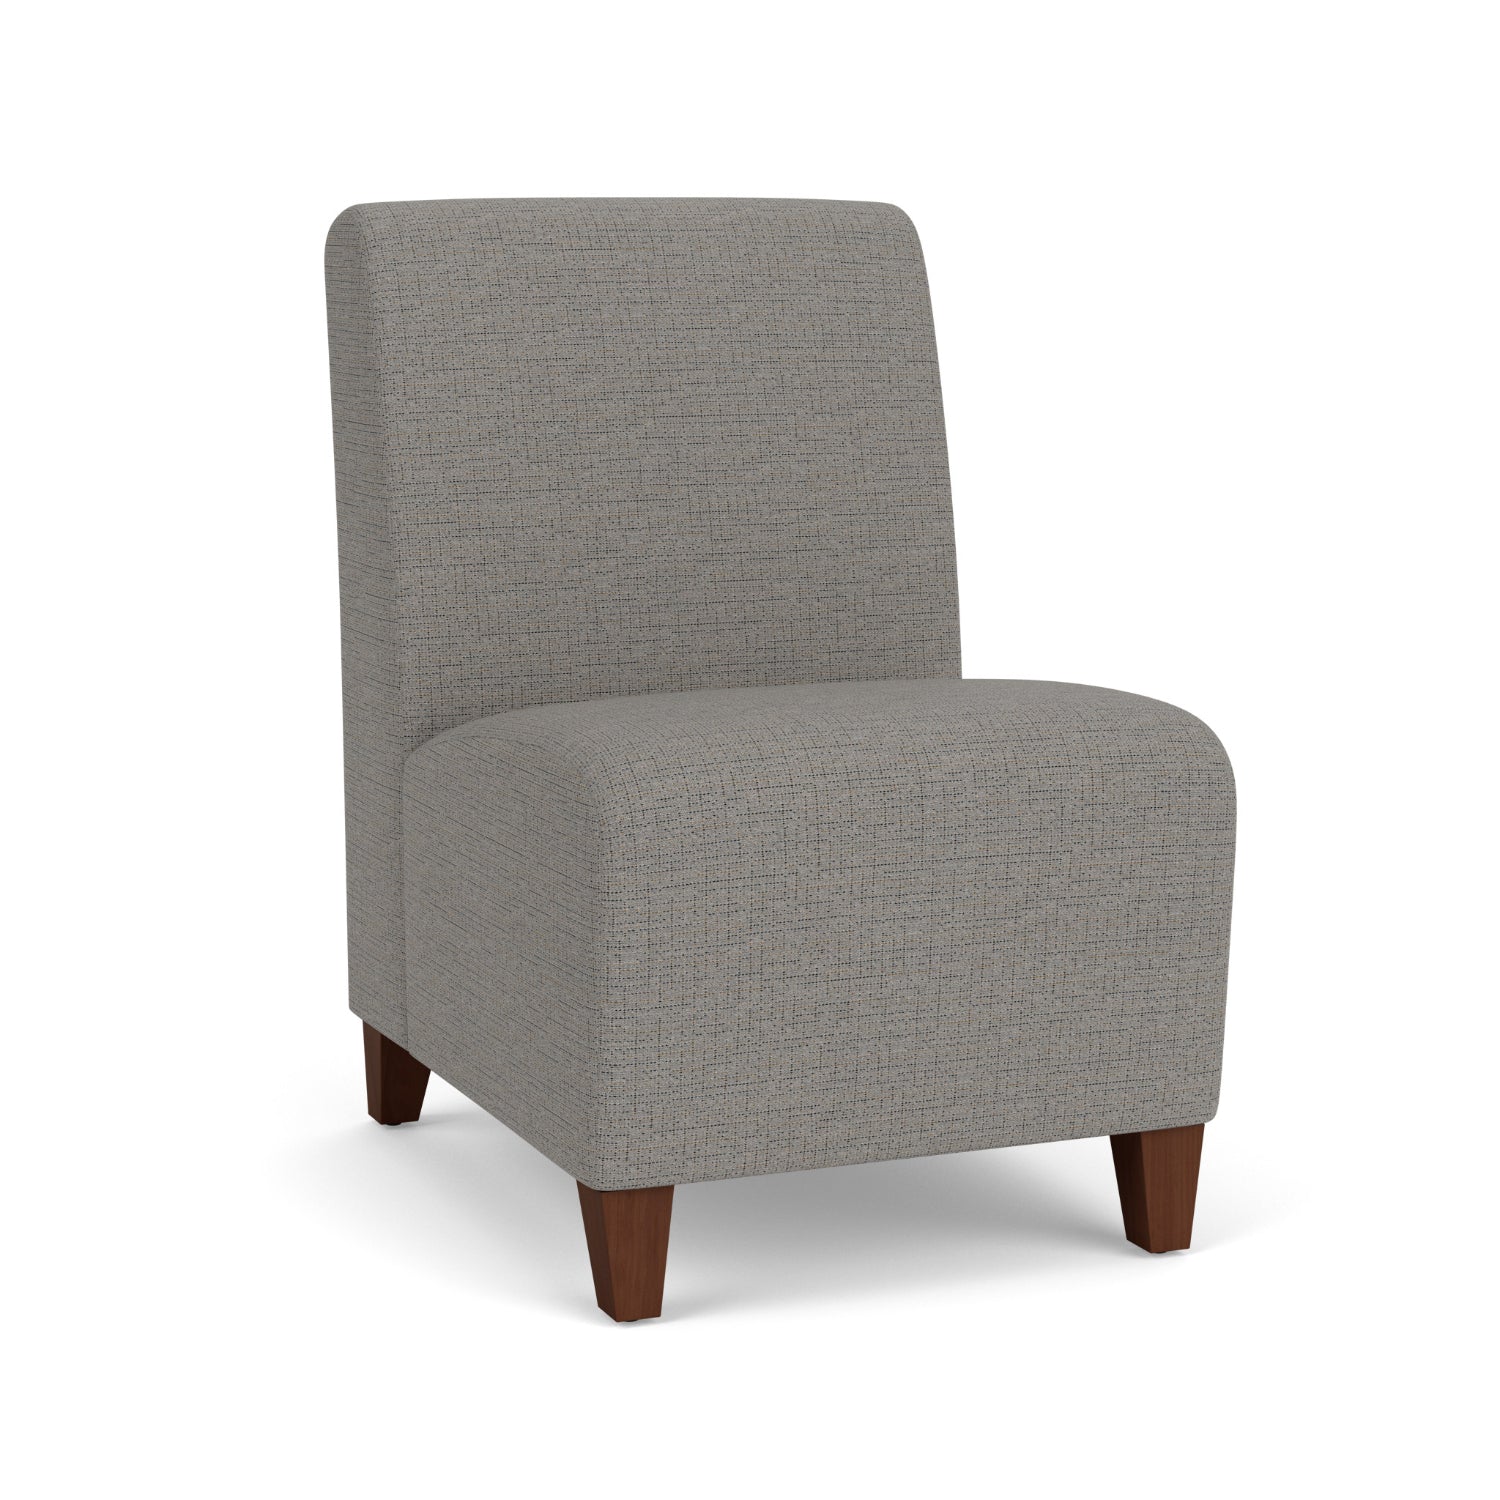 Siena Collection Reception Seating, Armless Guest Chair, Designer Fabric Upholstery, FREE SHIPPING